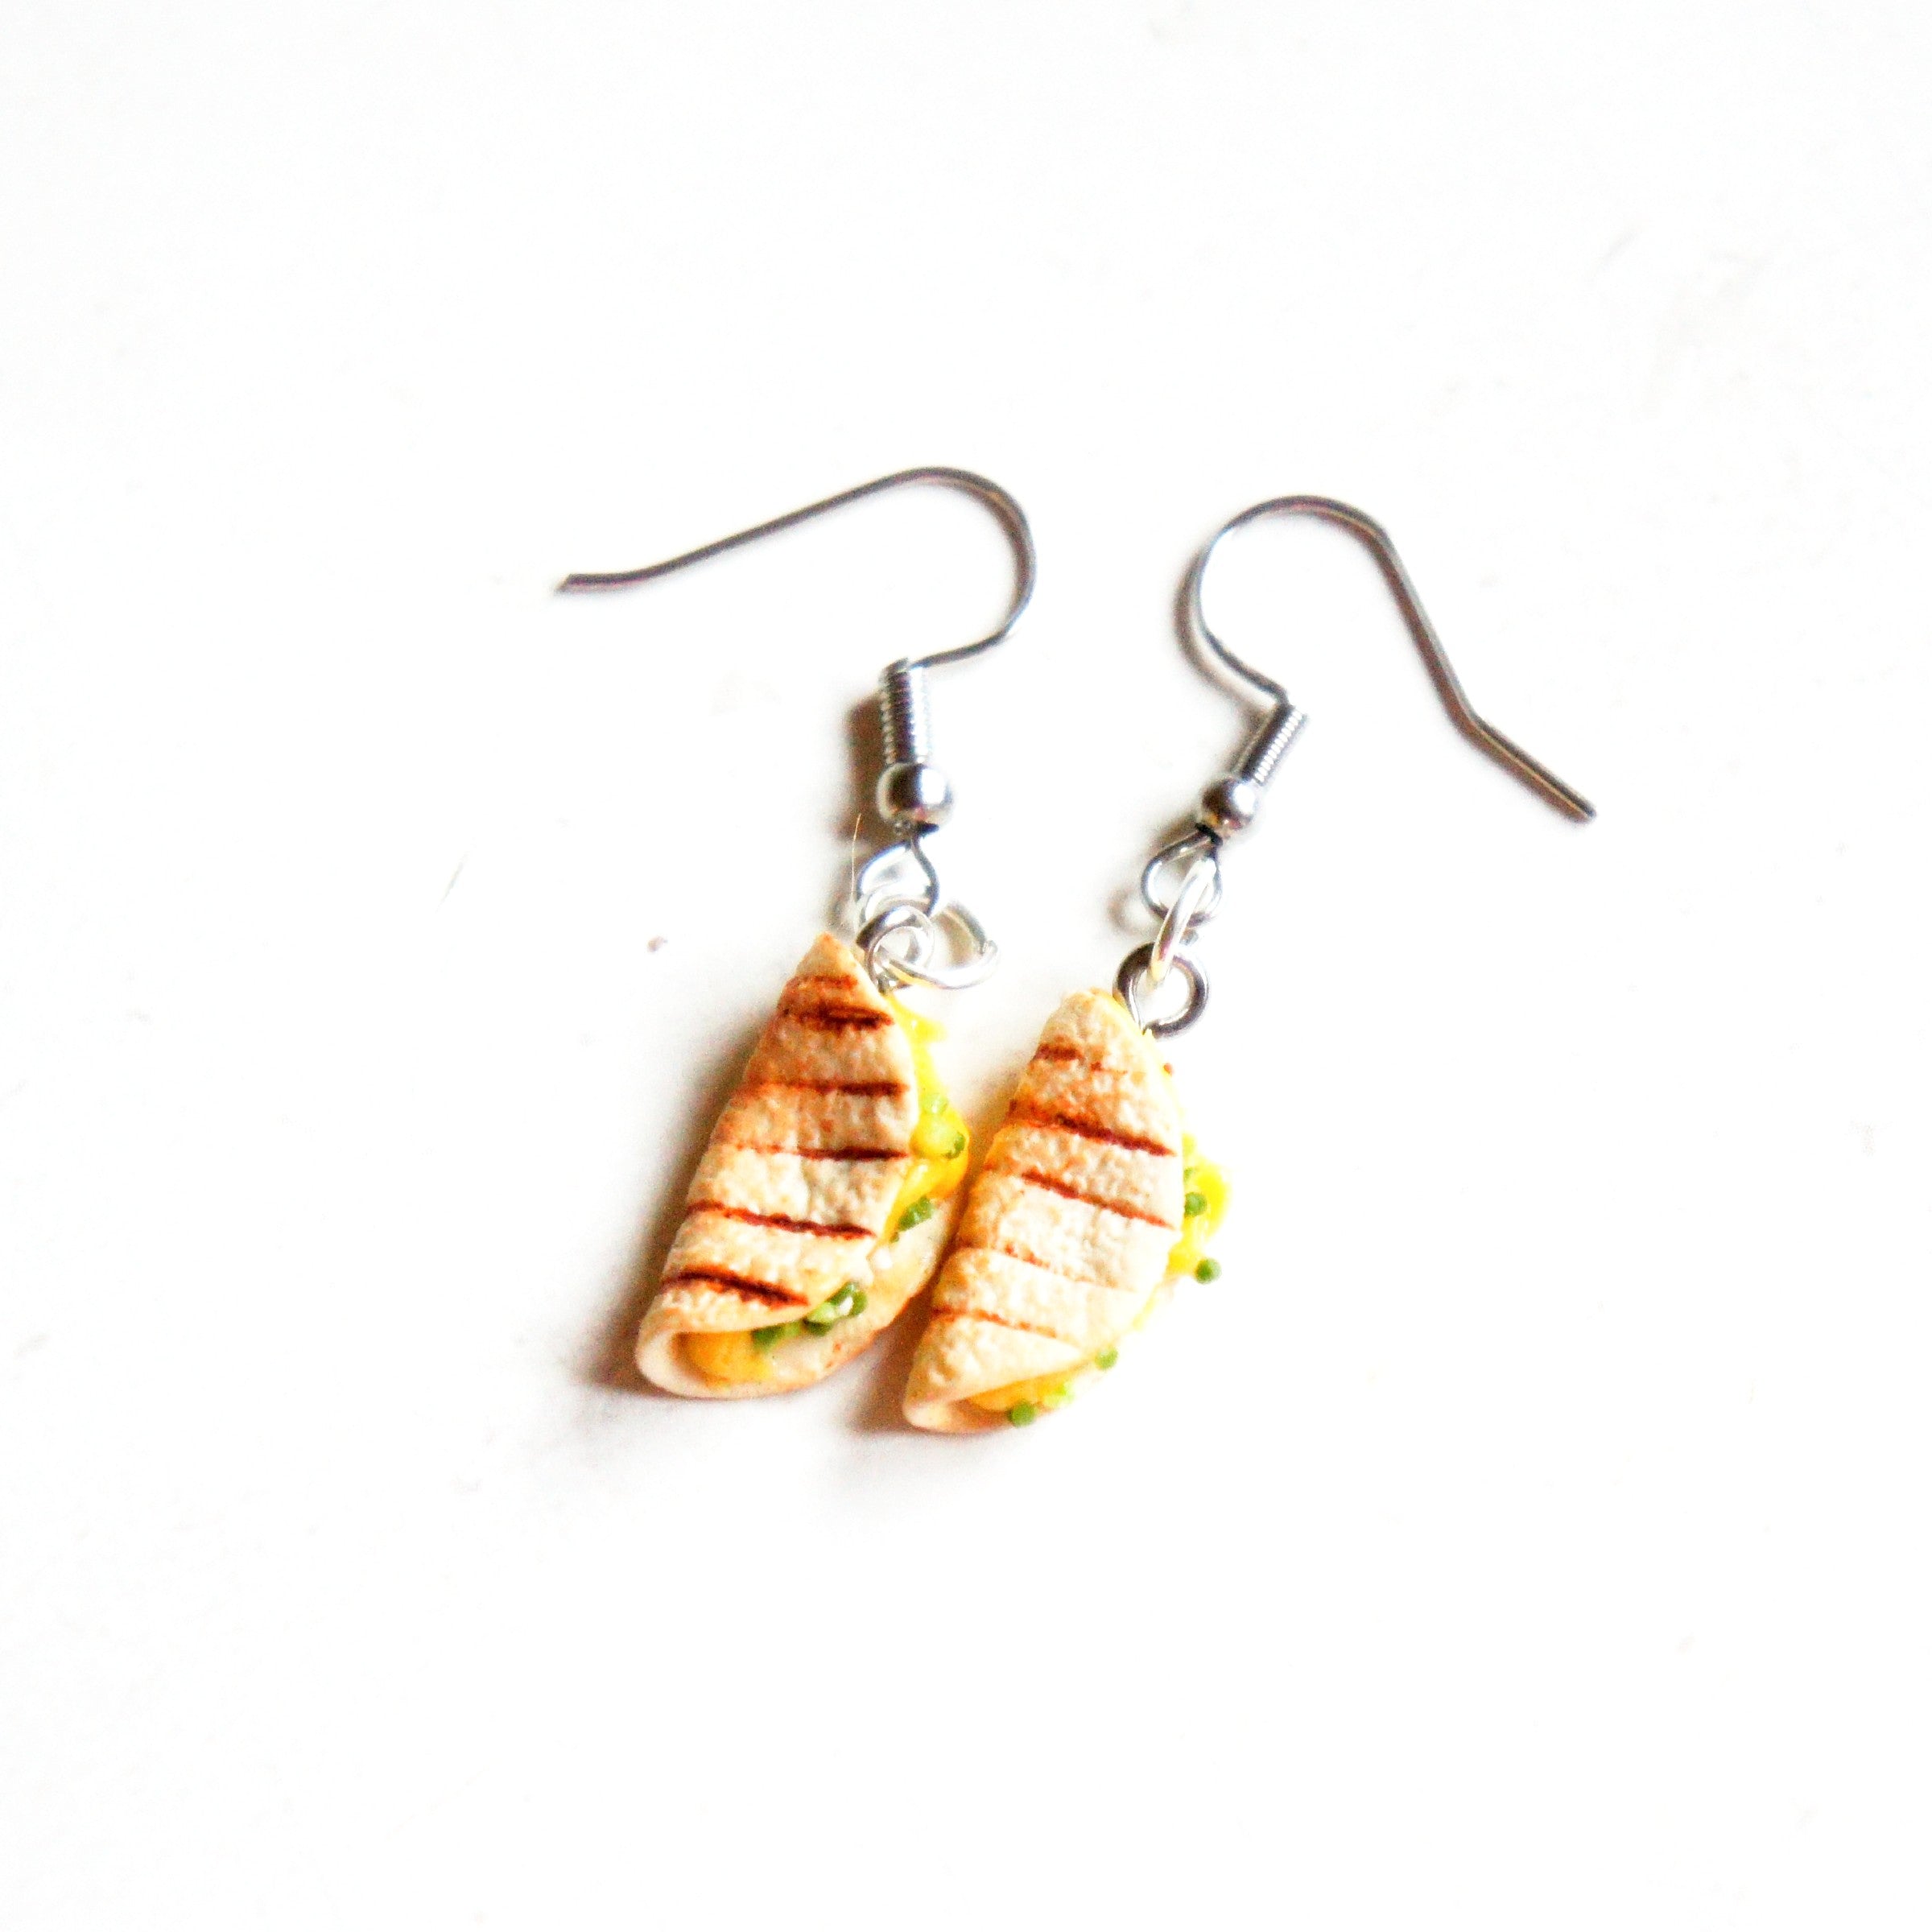 Breakfast Tacos Dangle Earrings - Jillicious charms and accessories